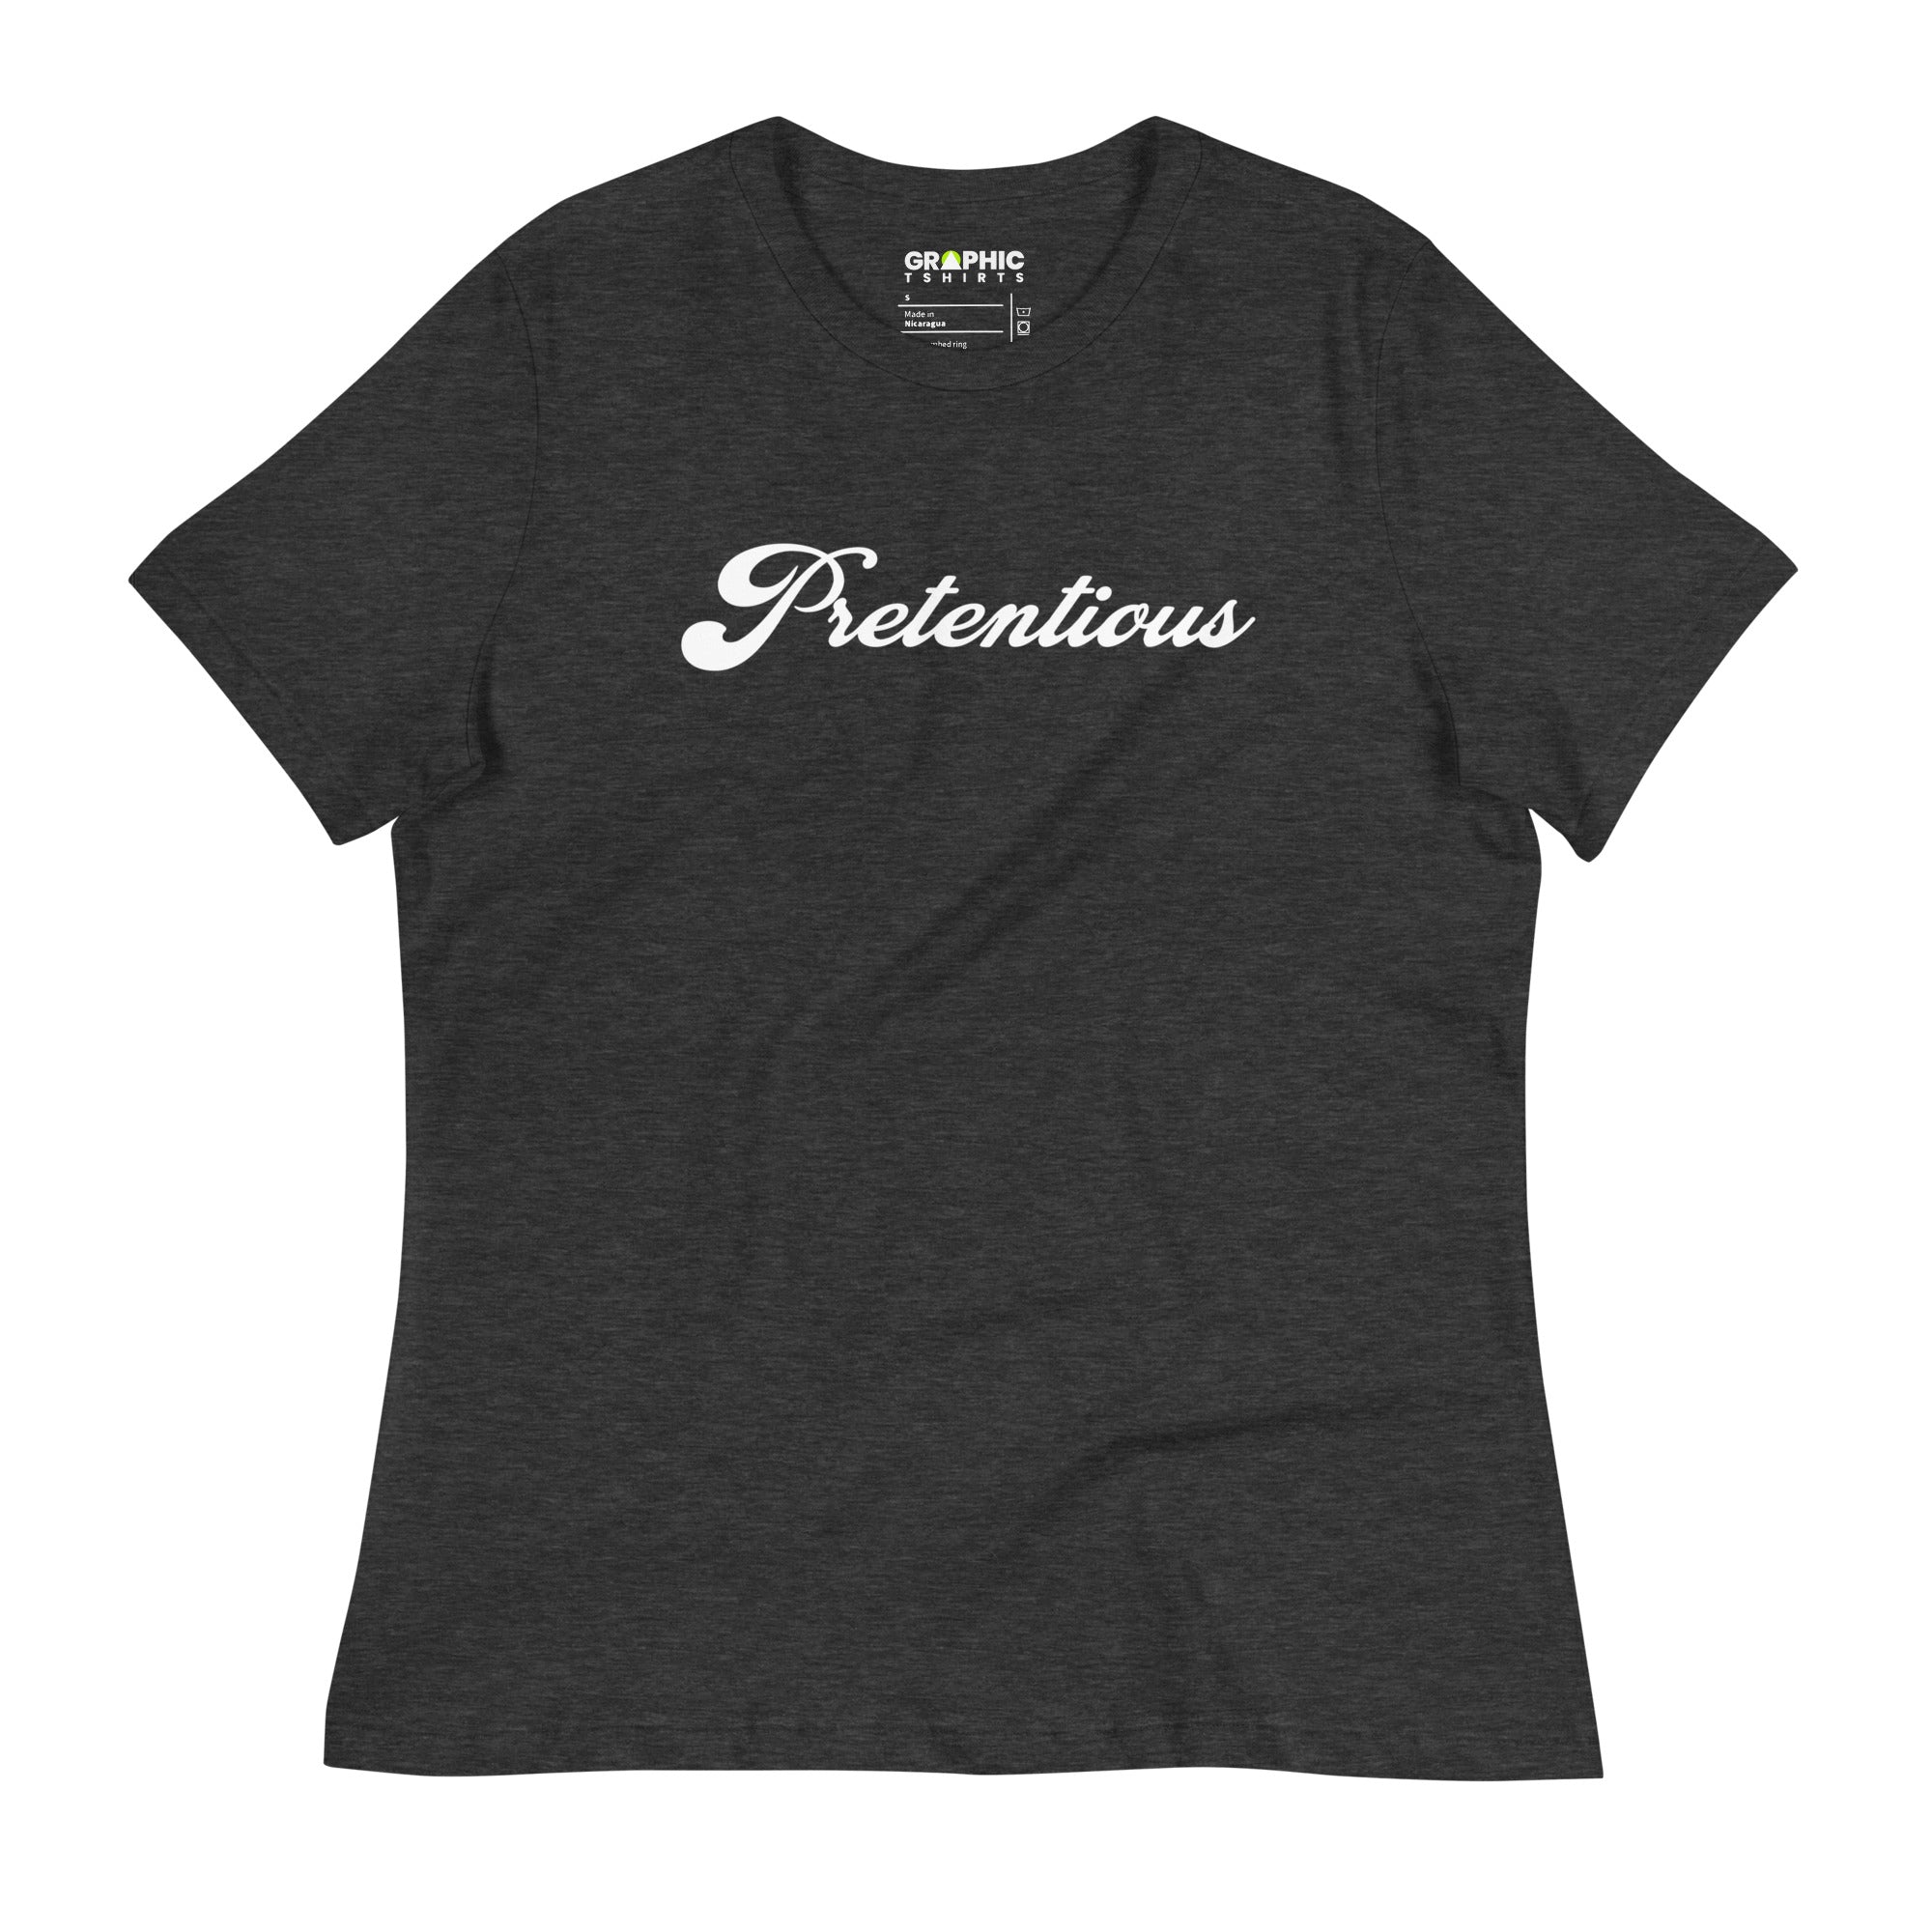 Women's Relaxed T-Shirt - Pretentious - GRAPHIC T-SHIRTS